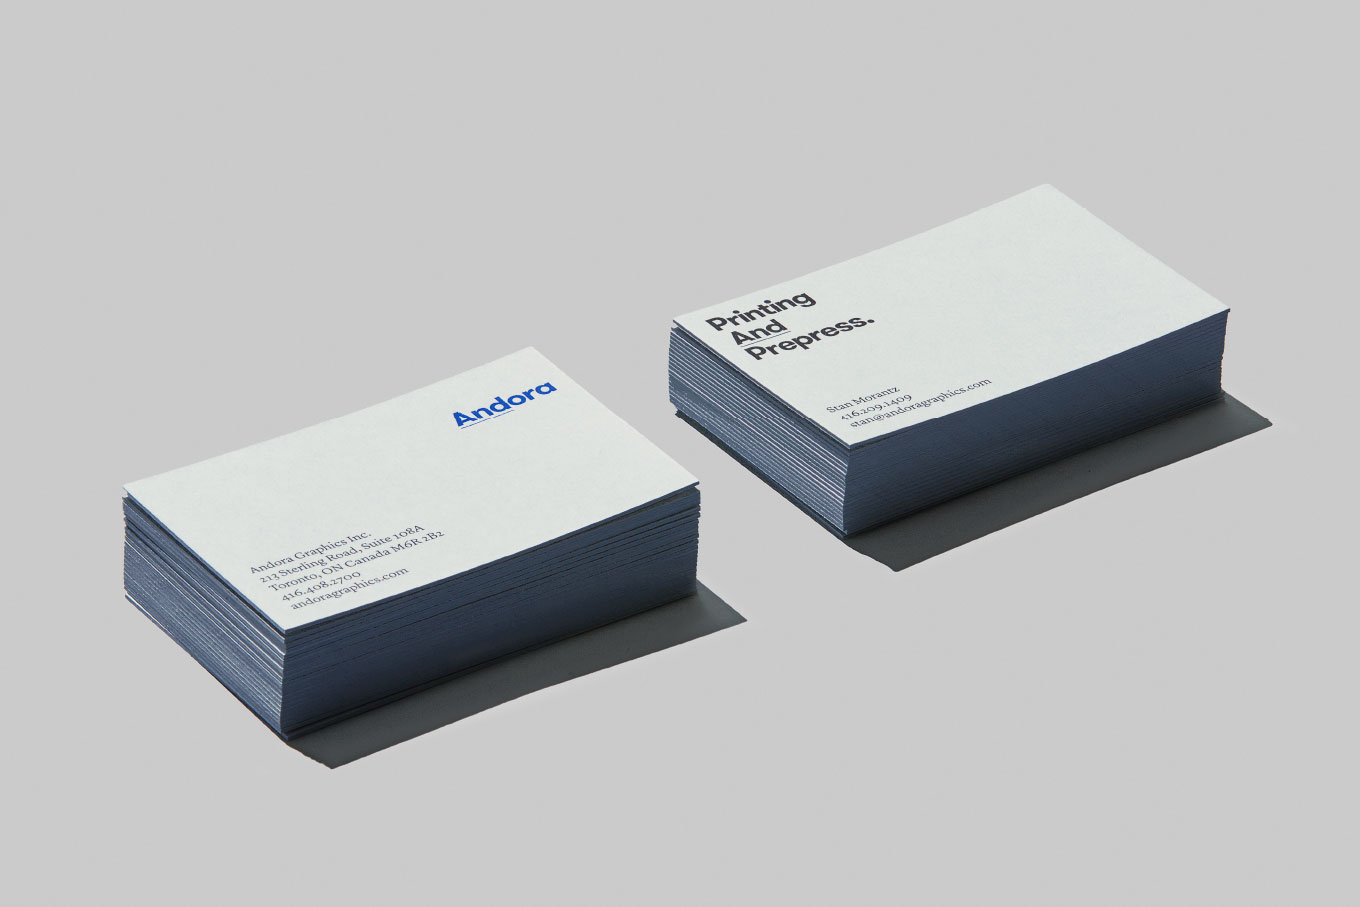 Pile of Andora business cards